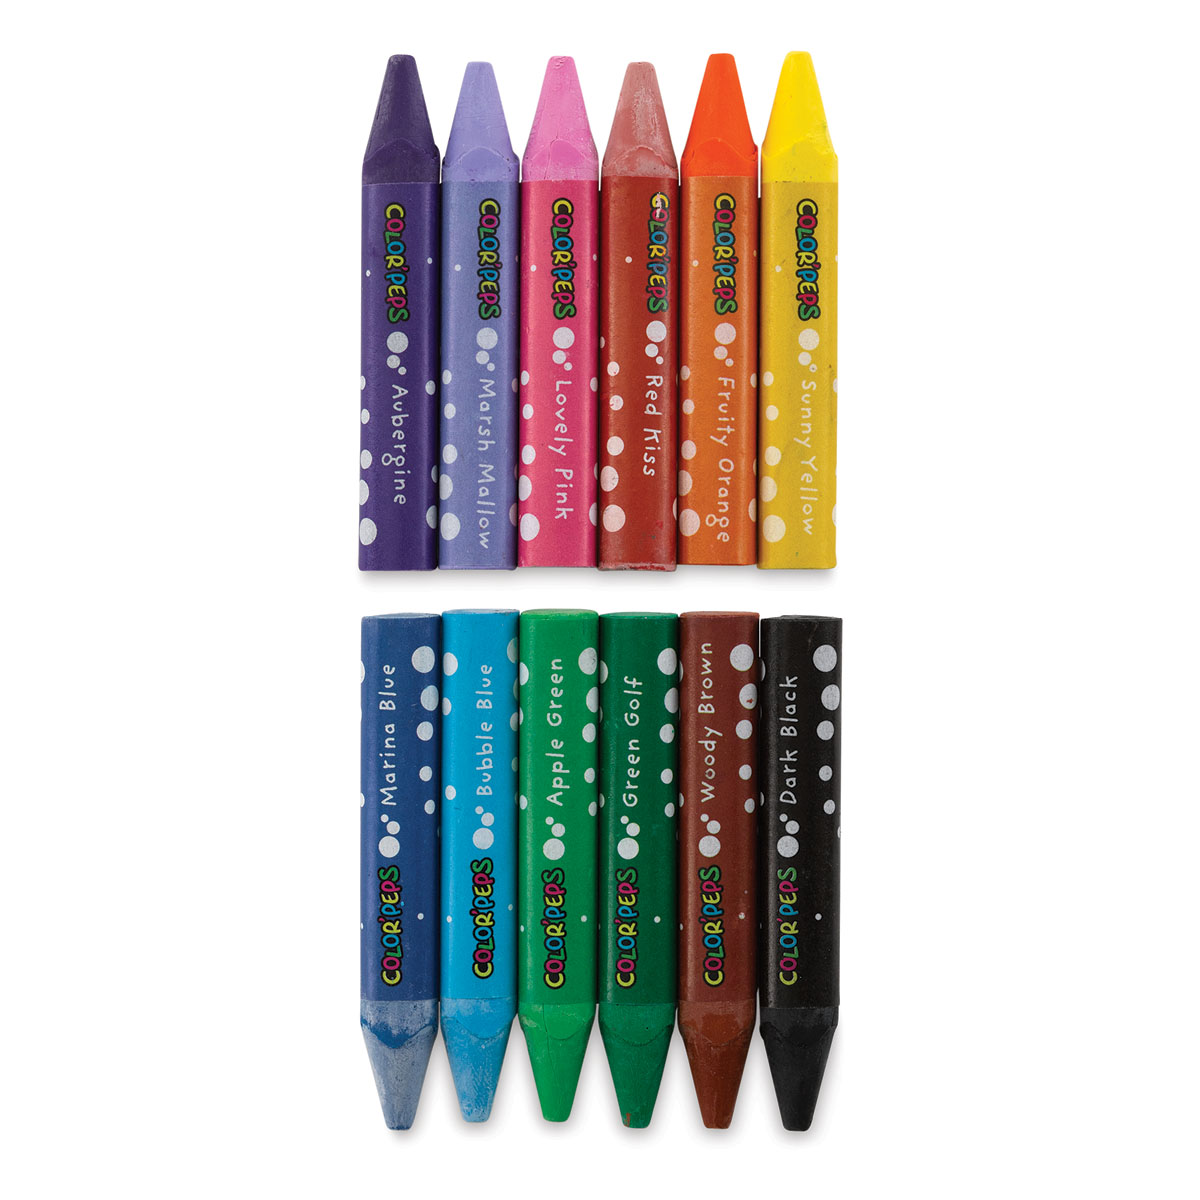 Maped Jumbo Triangular Colored Pencils, Assorted Colors, Set of 12